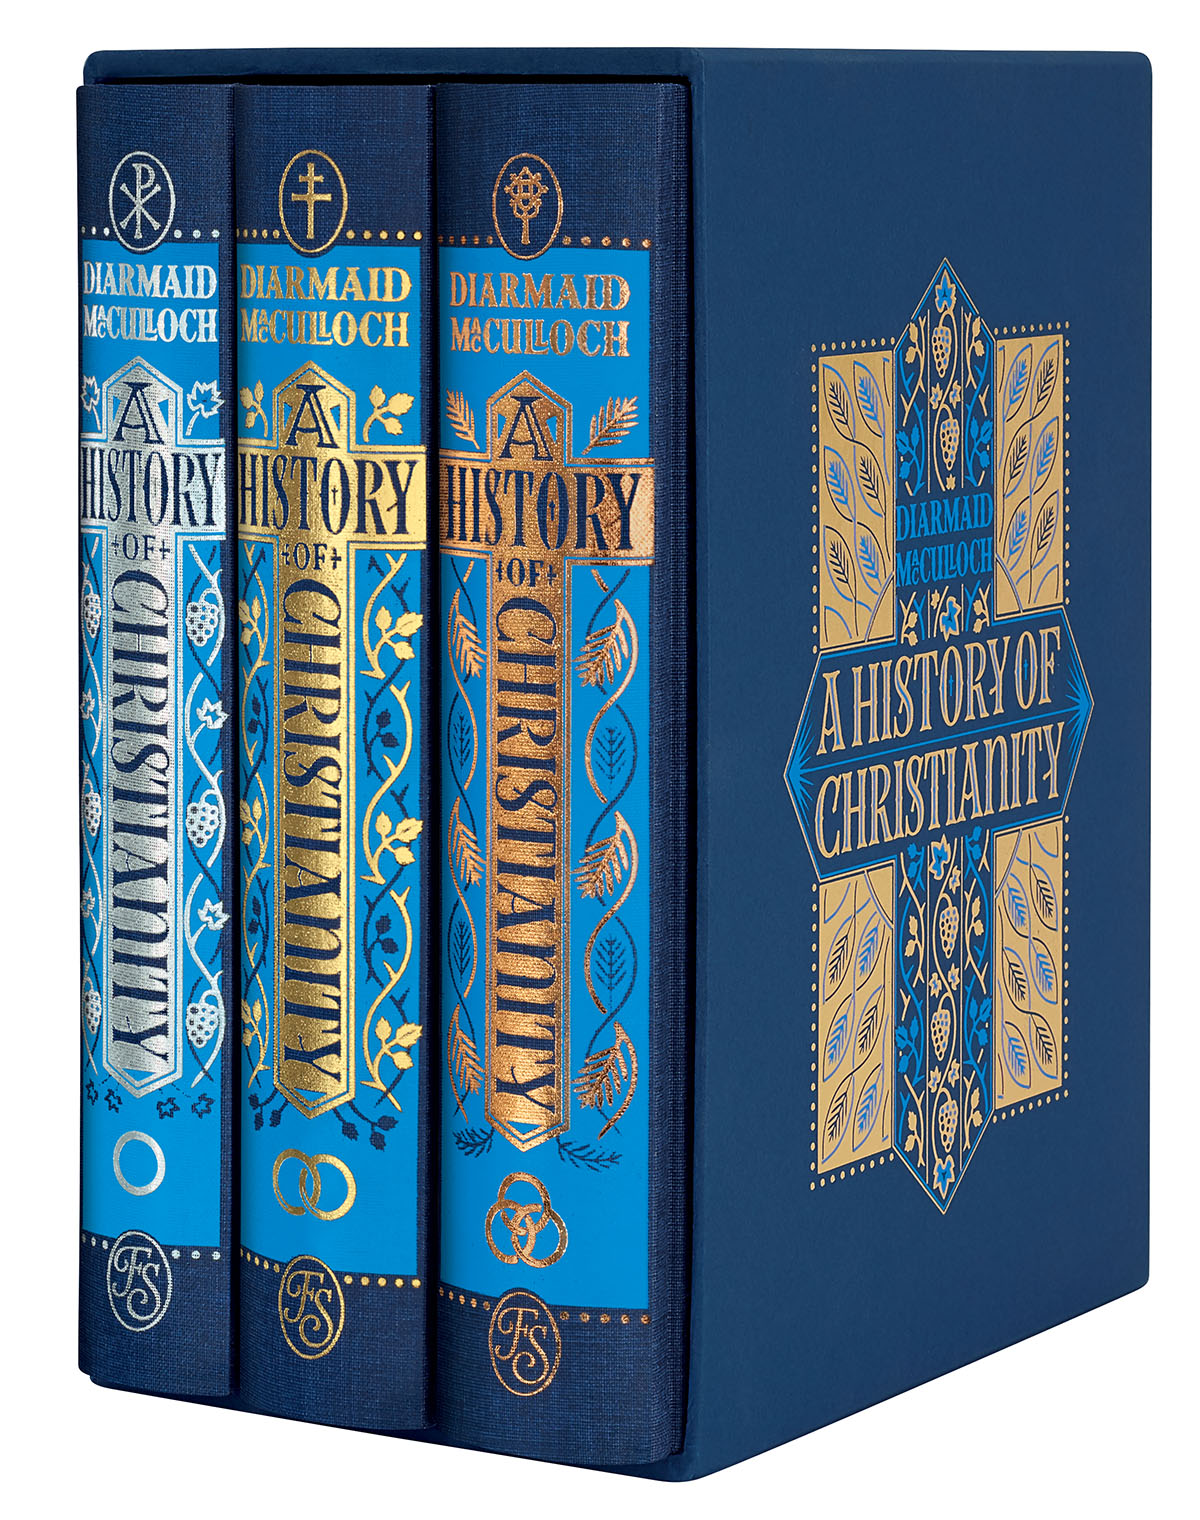 A History of Christianity, Slipcase and books